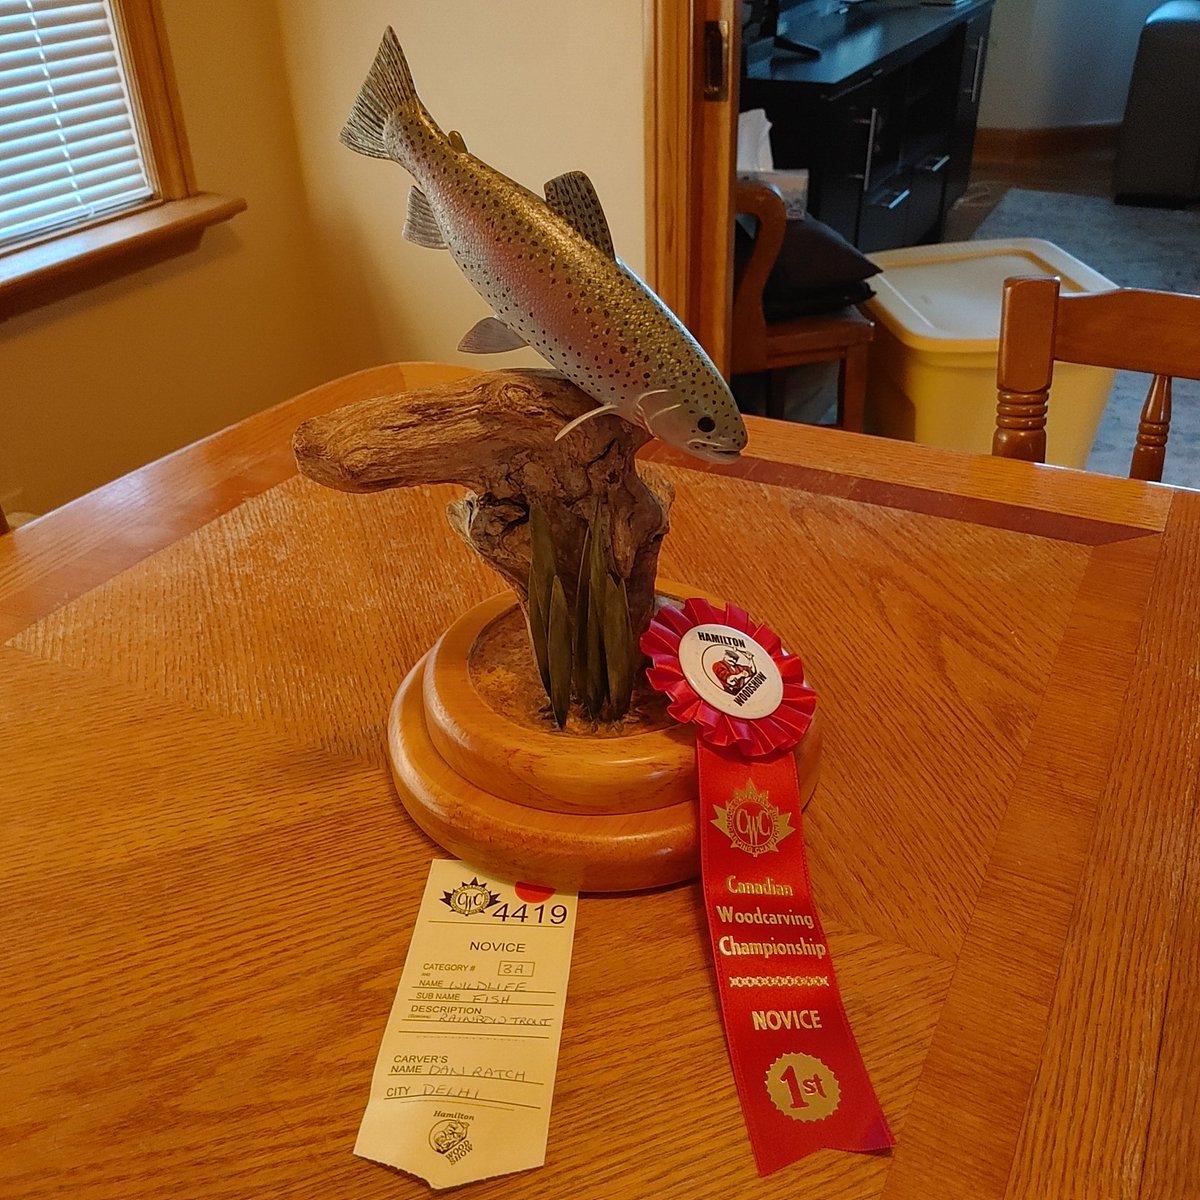 Was happy to place first in Hamilton Wood Show